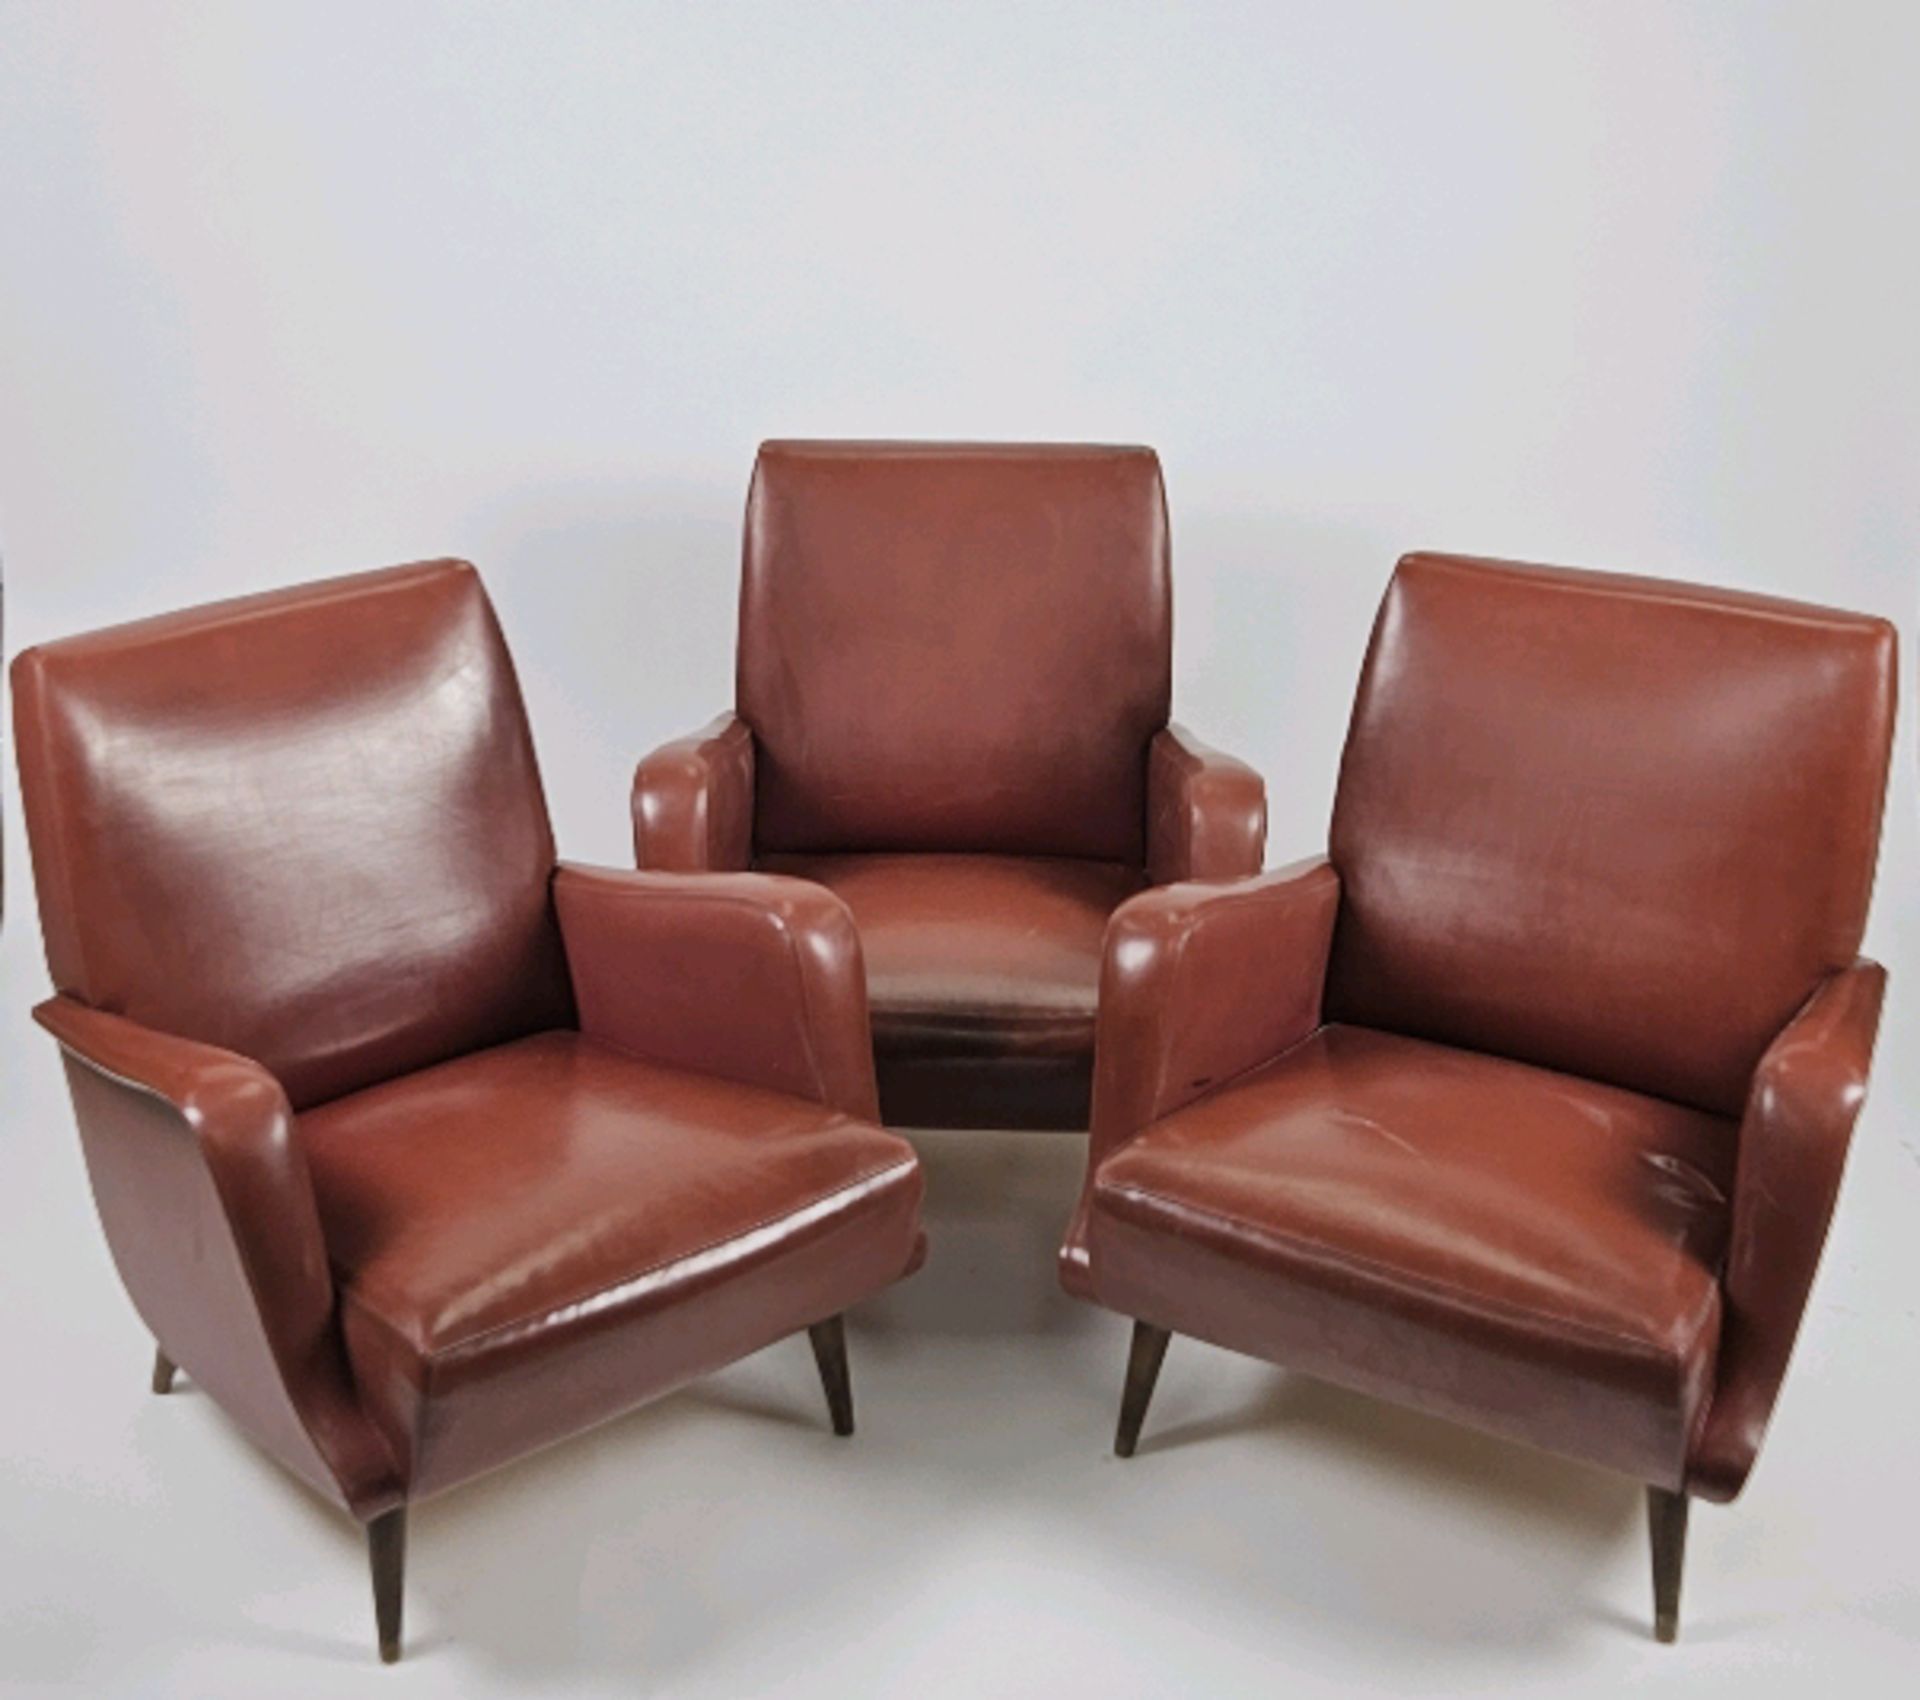 Trio of Faux Leather Accent Chairs - Image 2 of 7